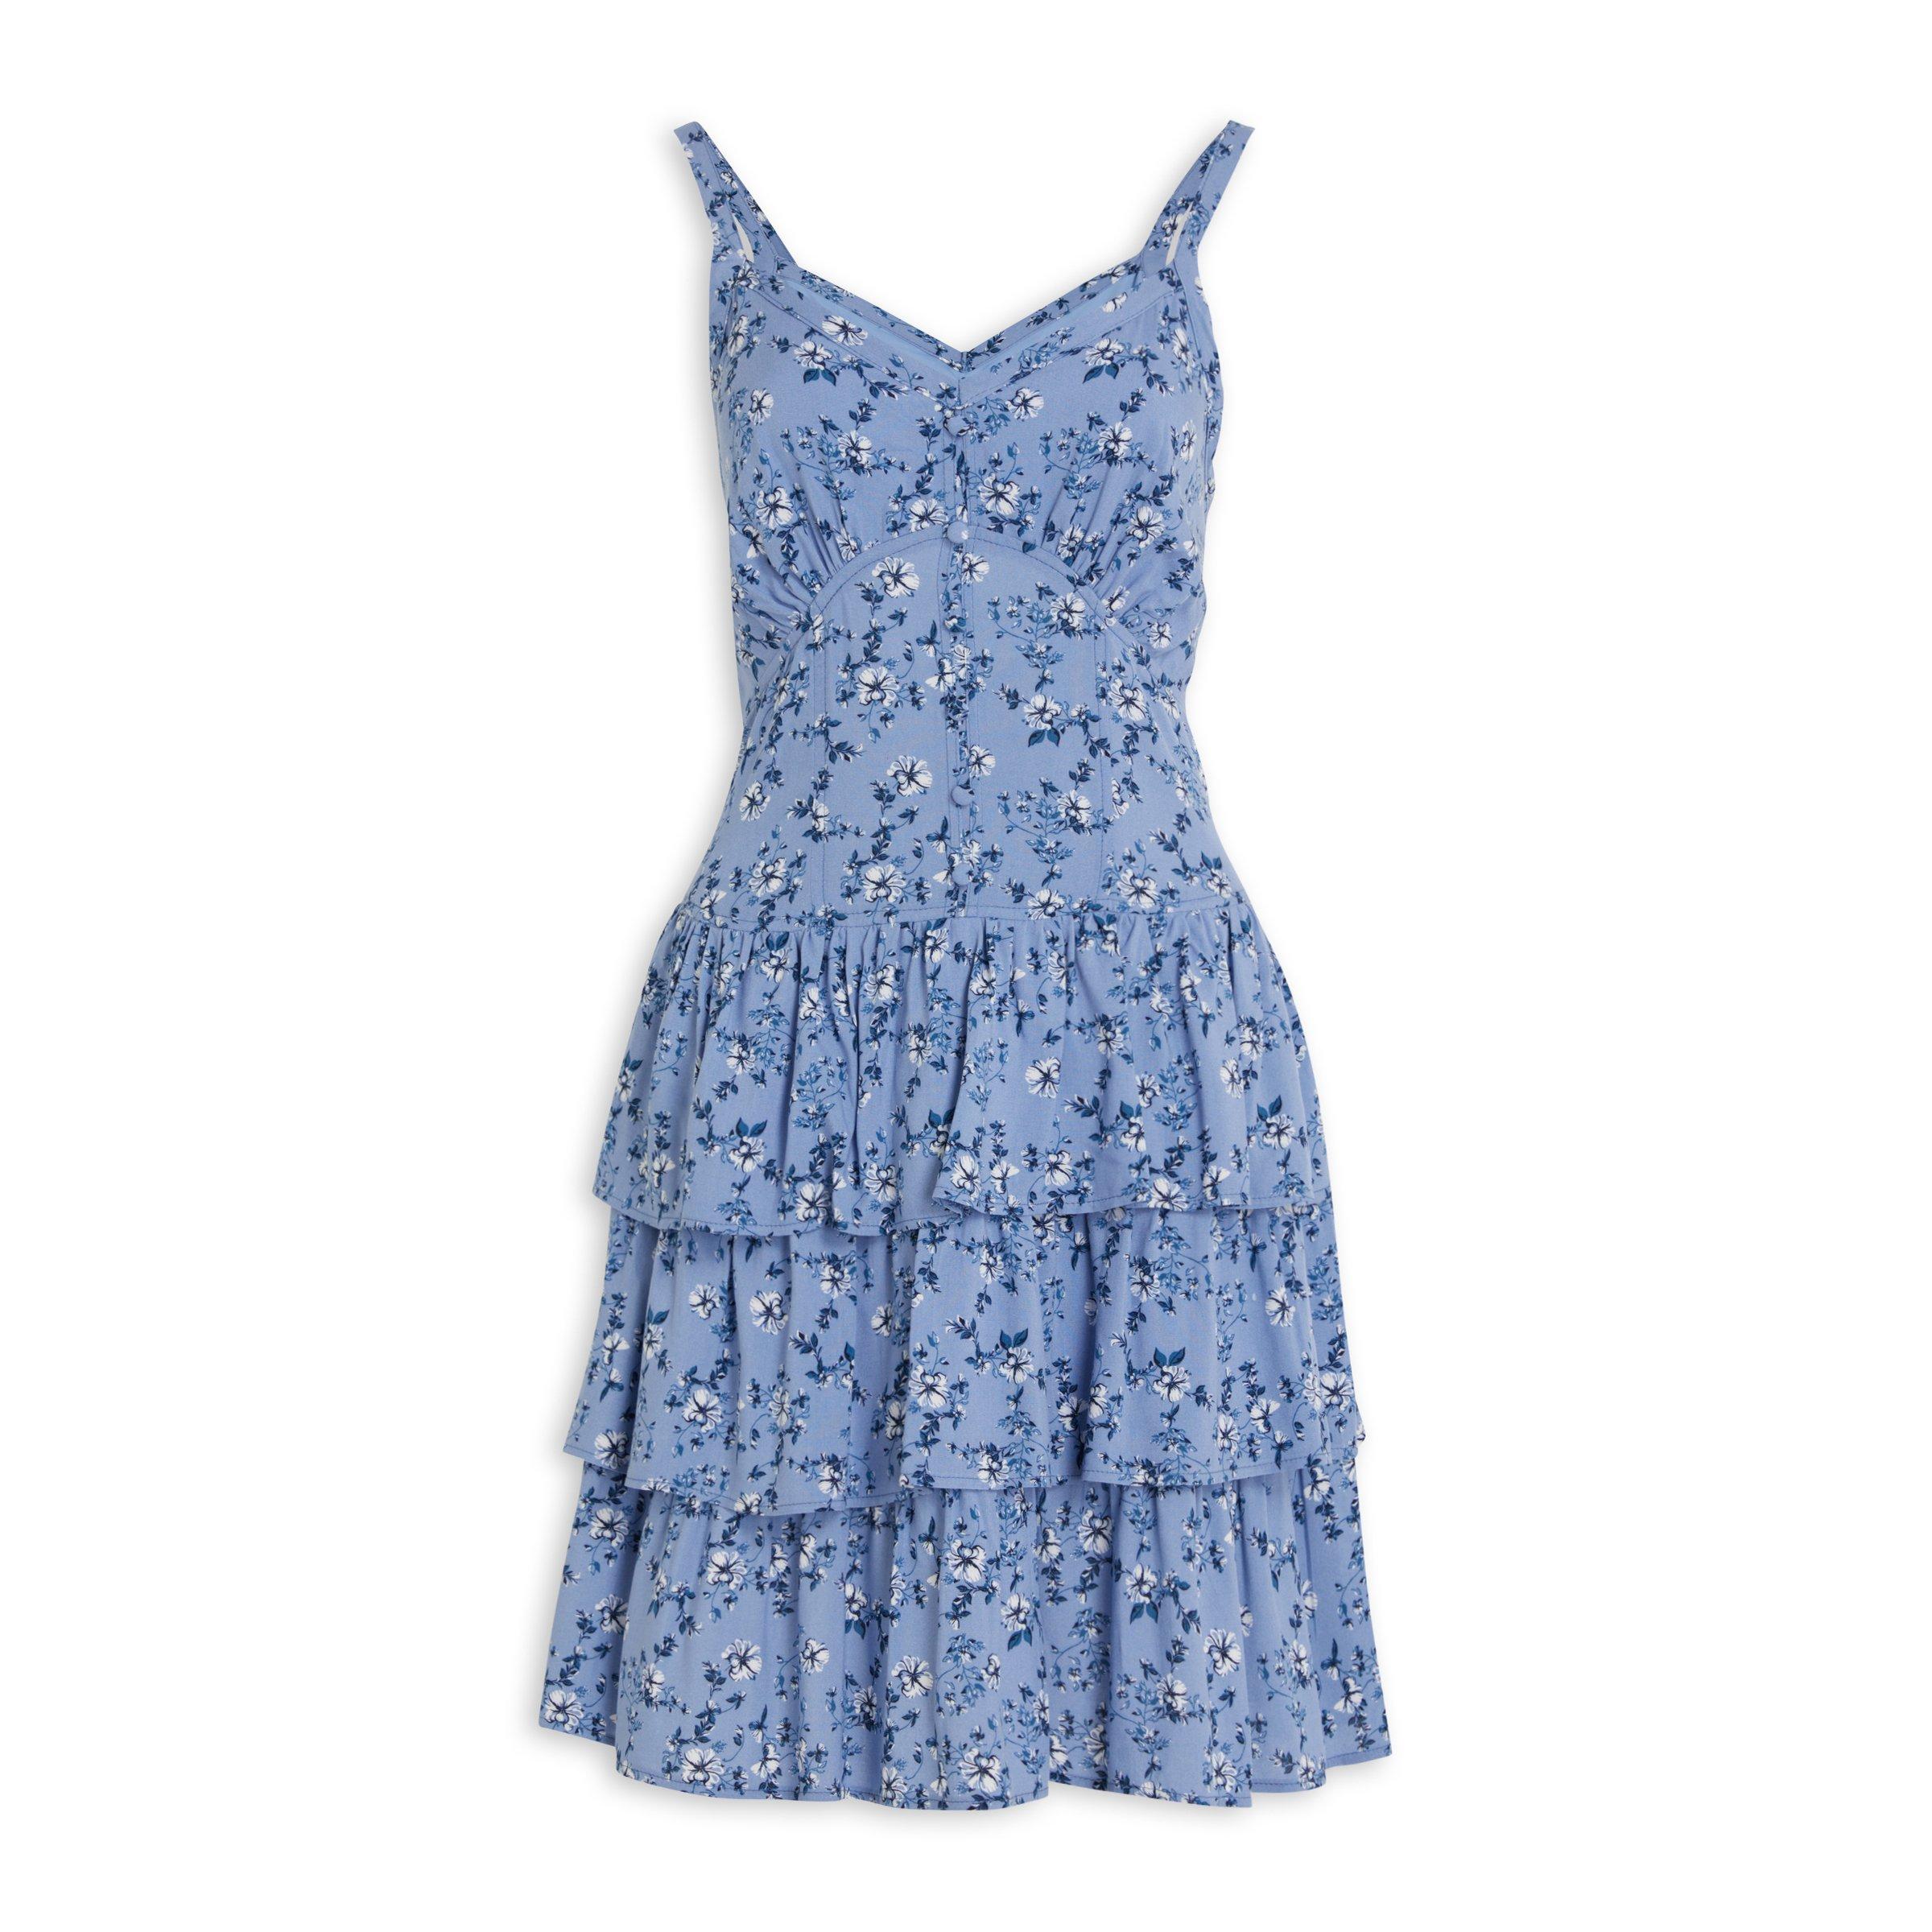 PRINTED TIERED DRESS - Blue / White